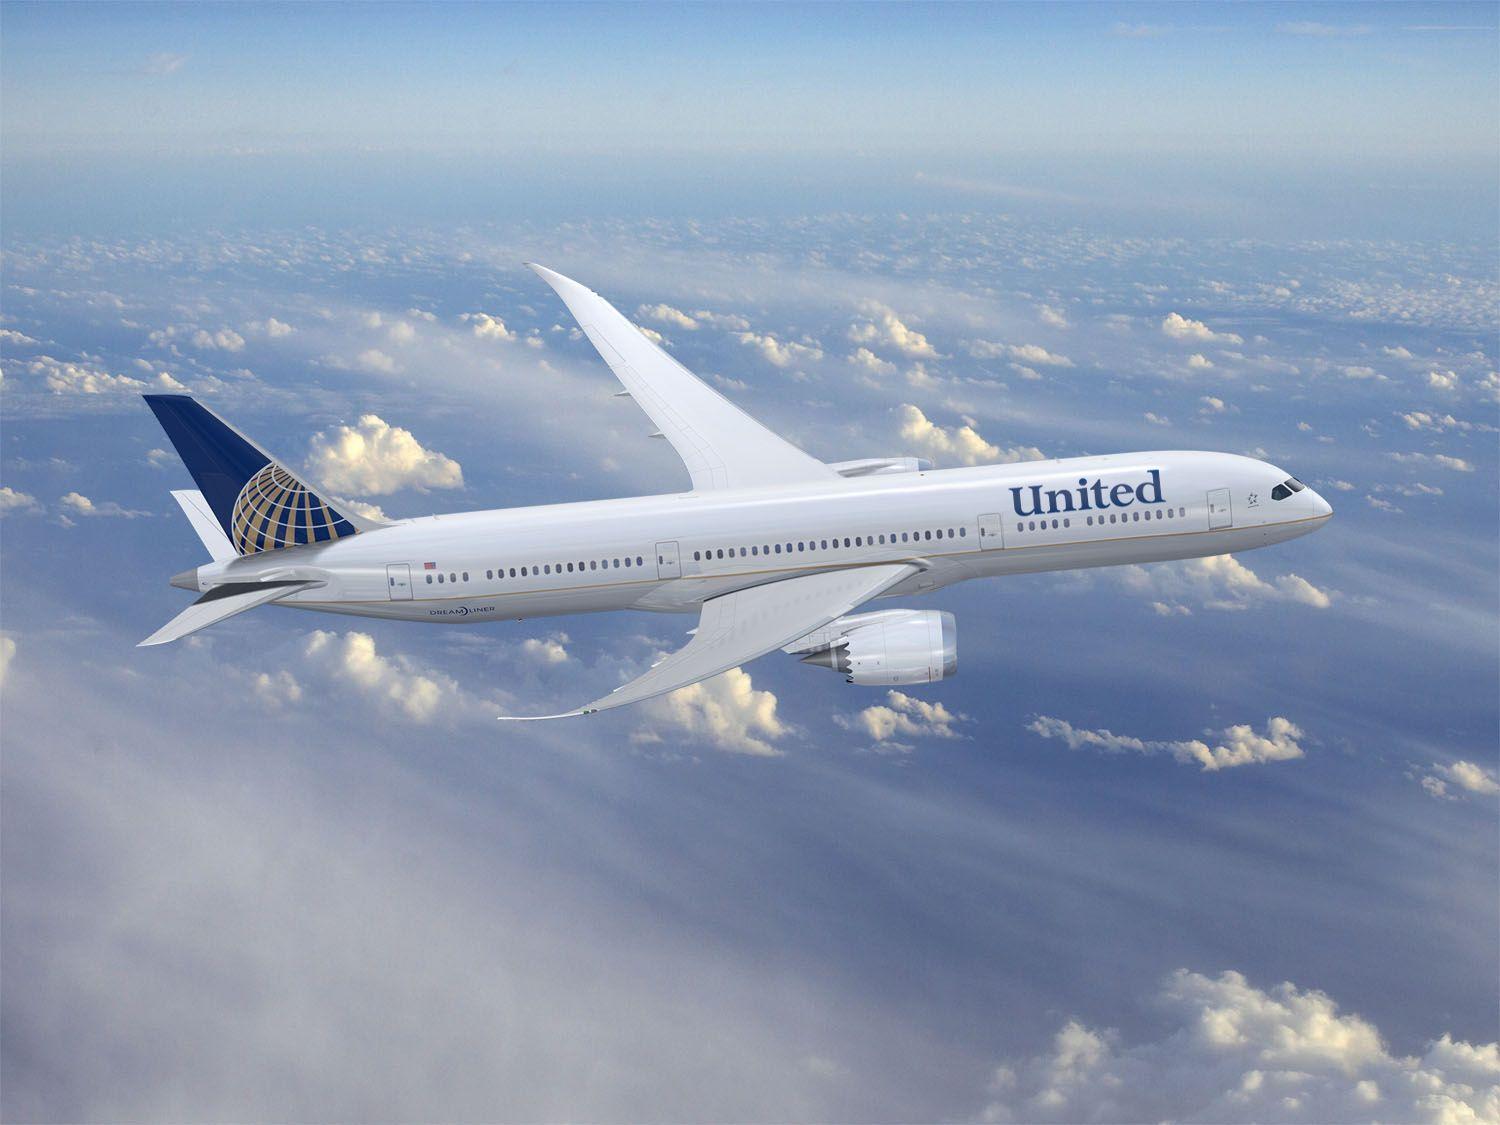 United Airlines Globe Logo - The Airline Blog: A few thoughts on the United-Continental merger